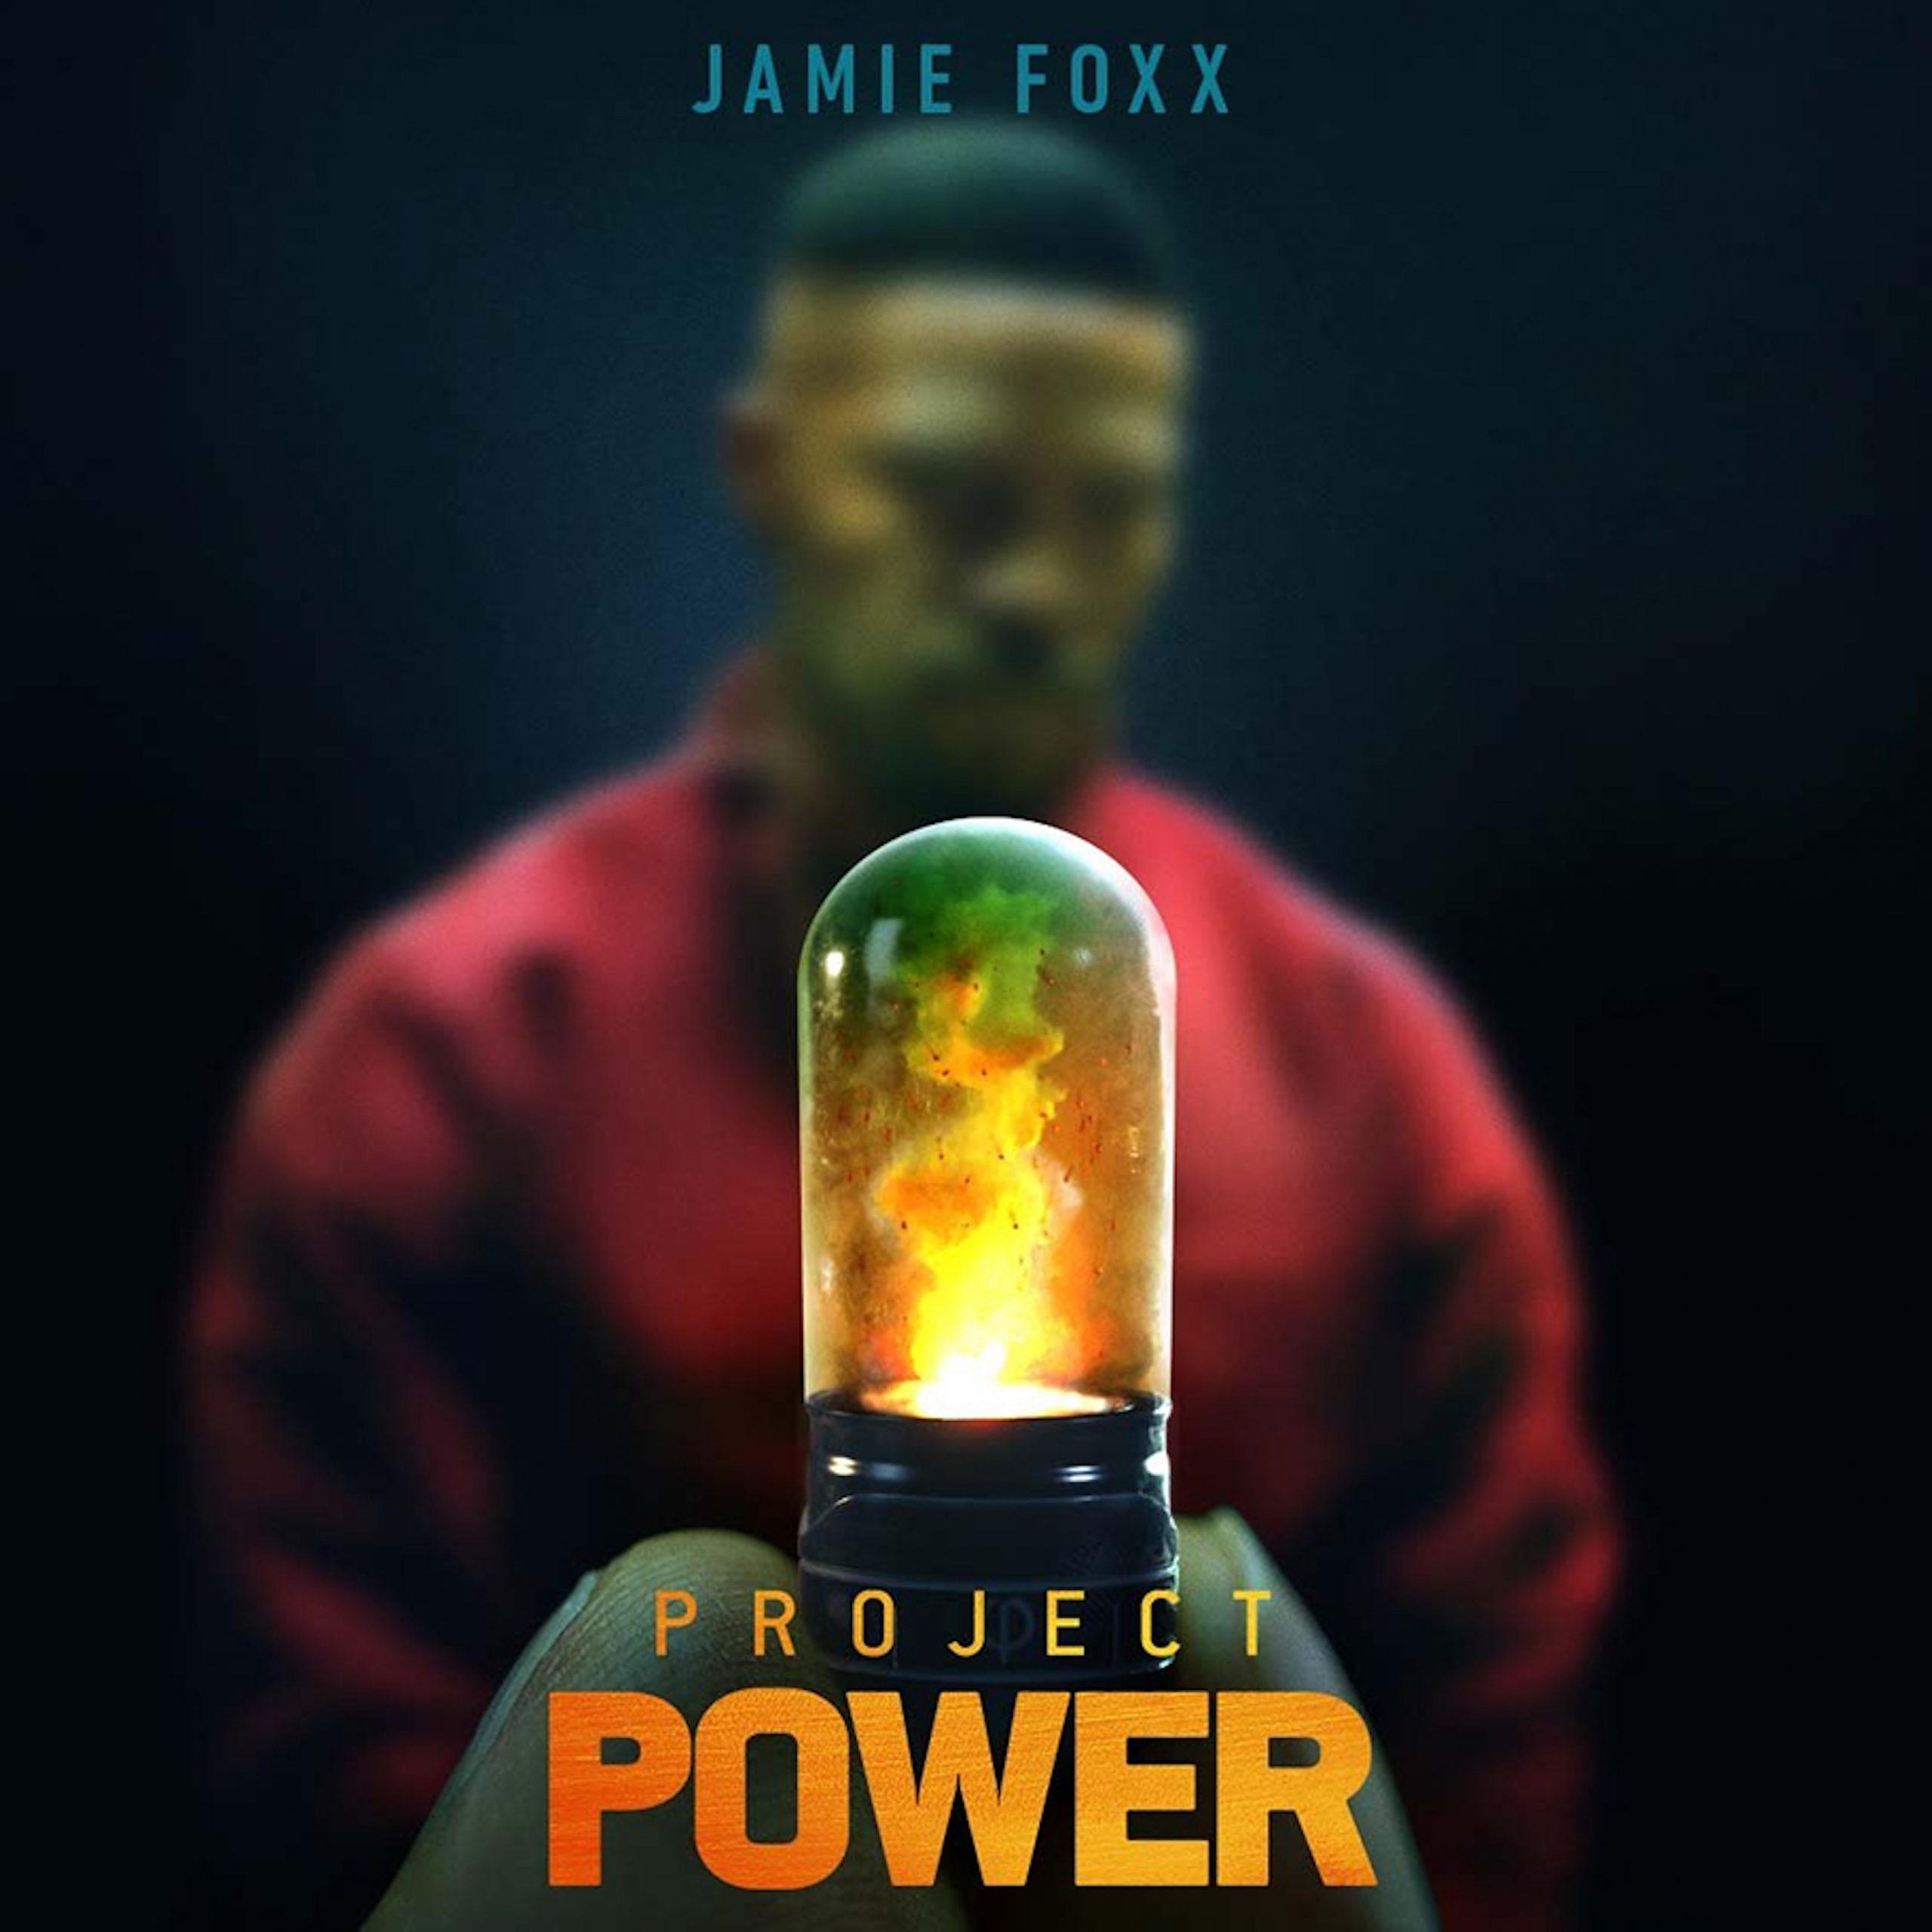 Trailer for Netflix’s Project Power Hits: What Would You Risk?